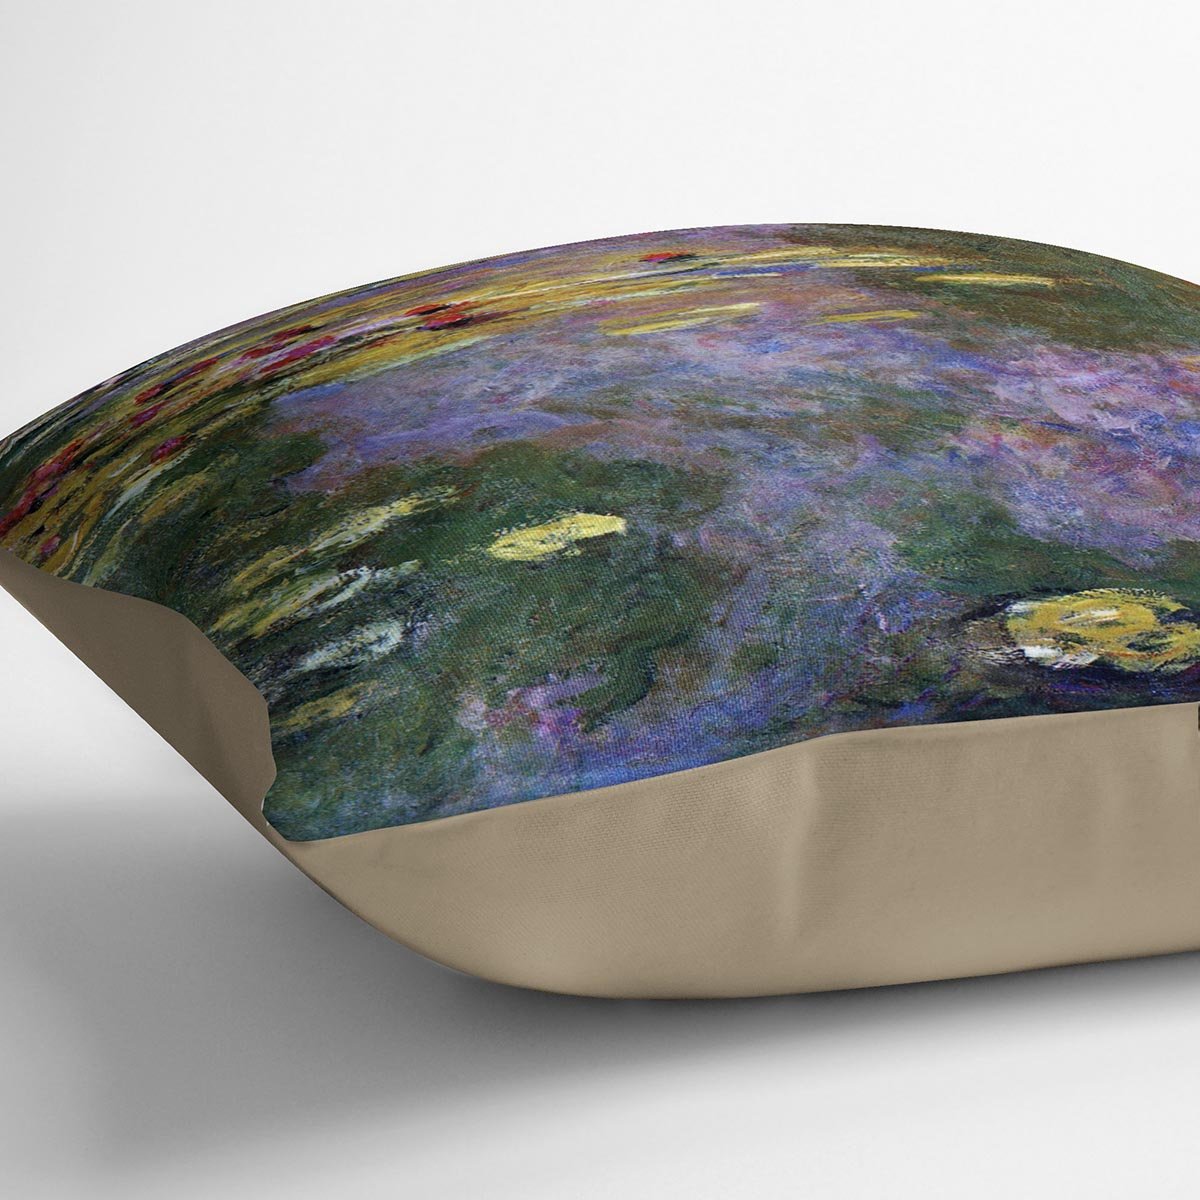 Water Lily Pond Giverny by Monet Throw Pillow